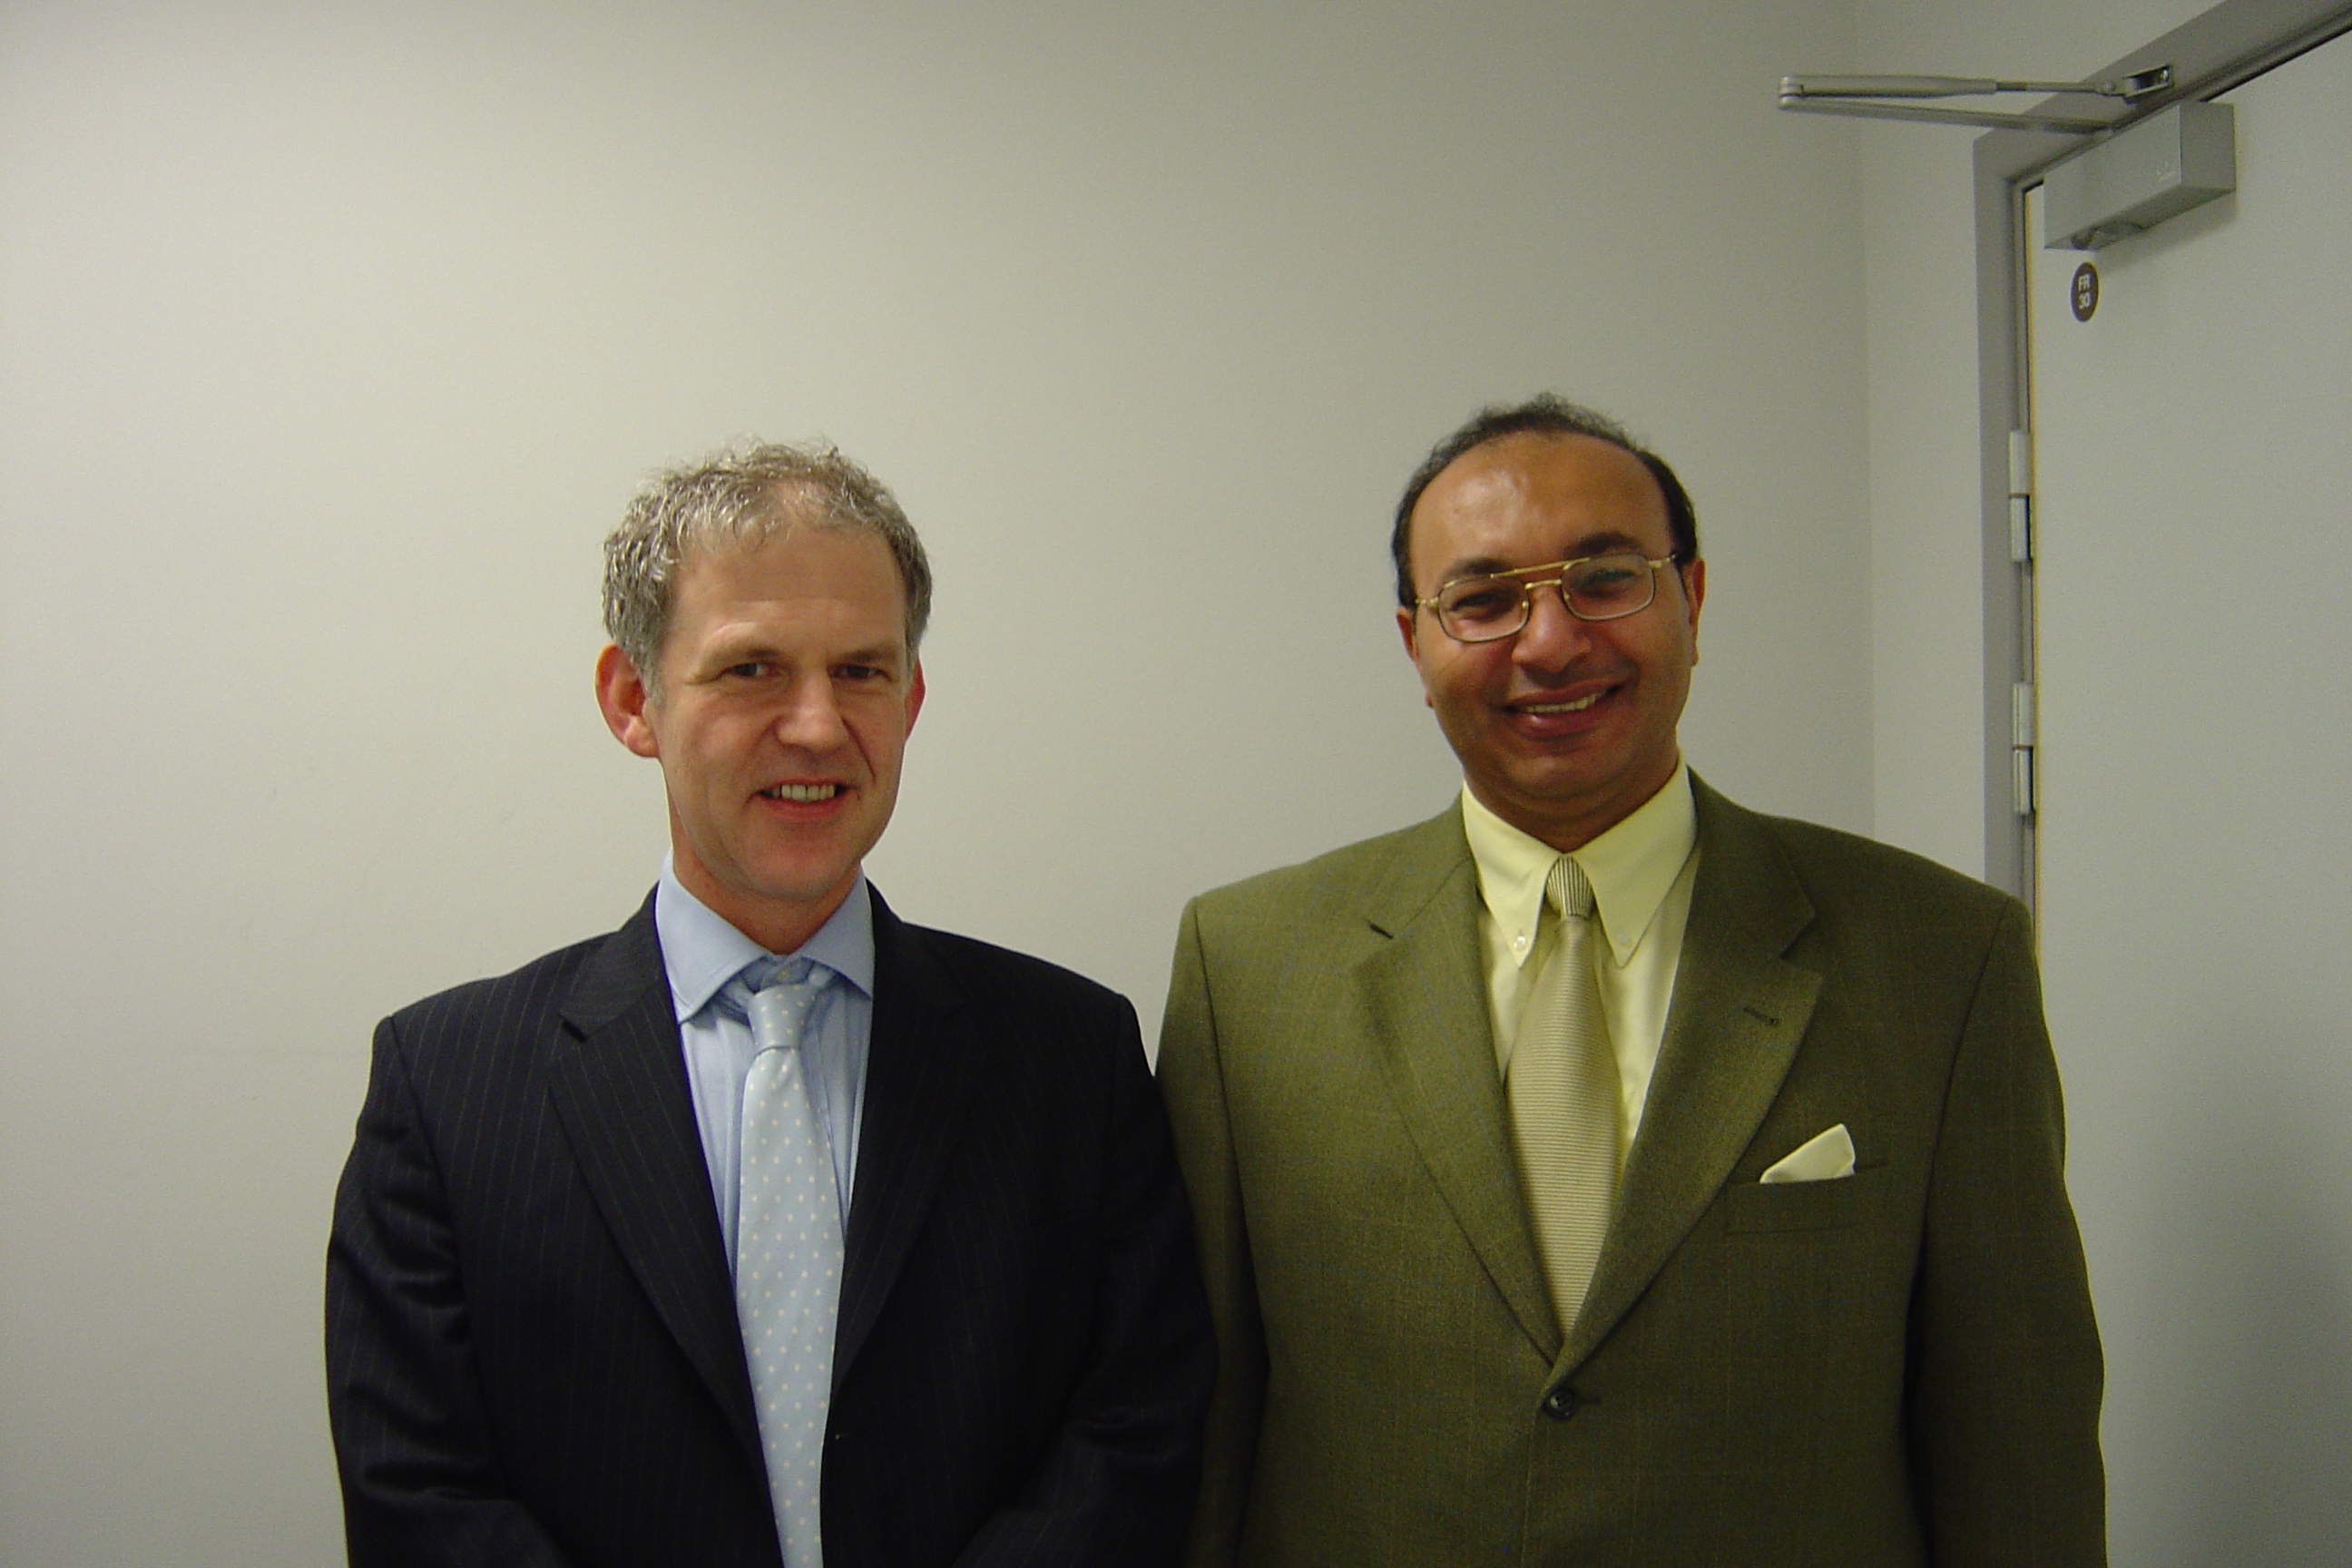 Darent Valley Hospital 2004: Dr. El Miedany and DR. Toth celebrating the Launch of the new Osteoporosis and Falls integrated Service